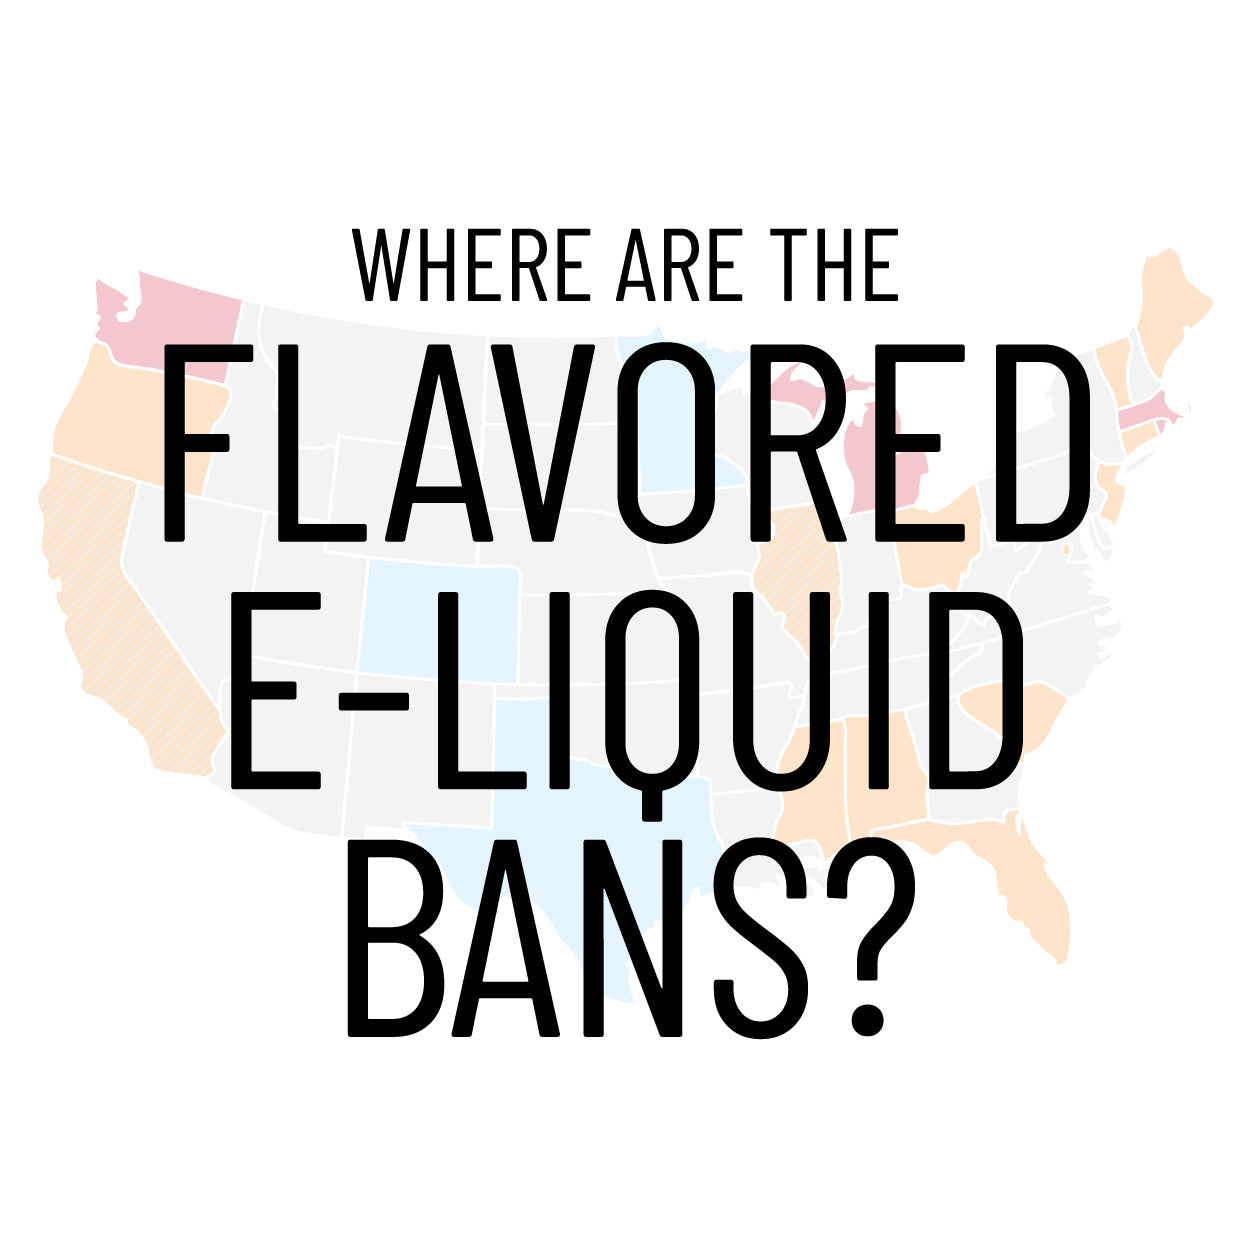 Where Are The Flavored eLiquid Bans?